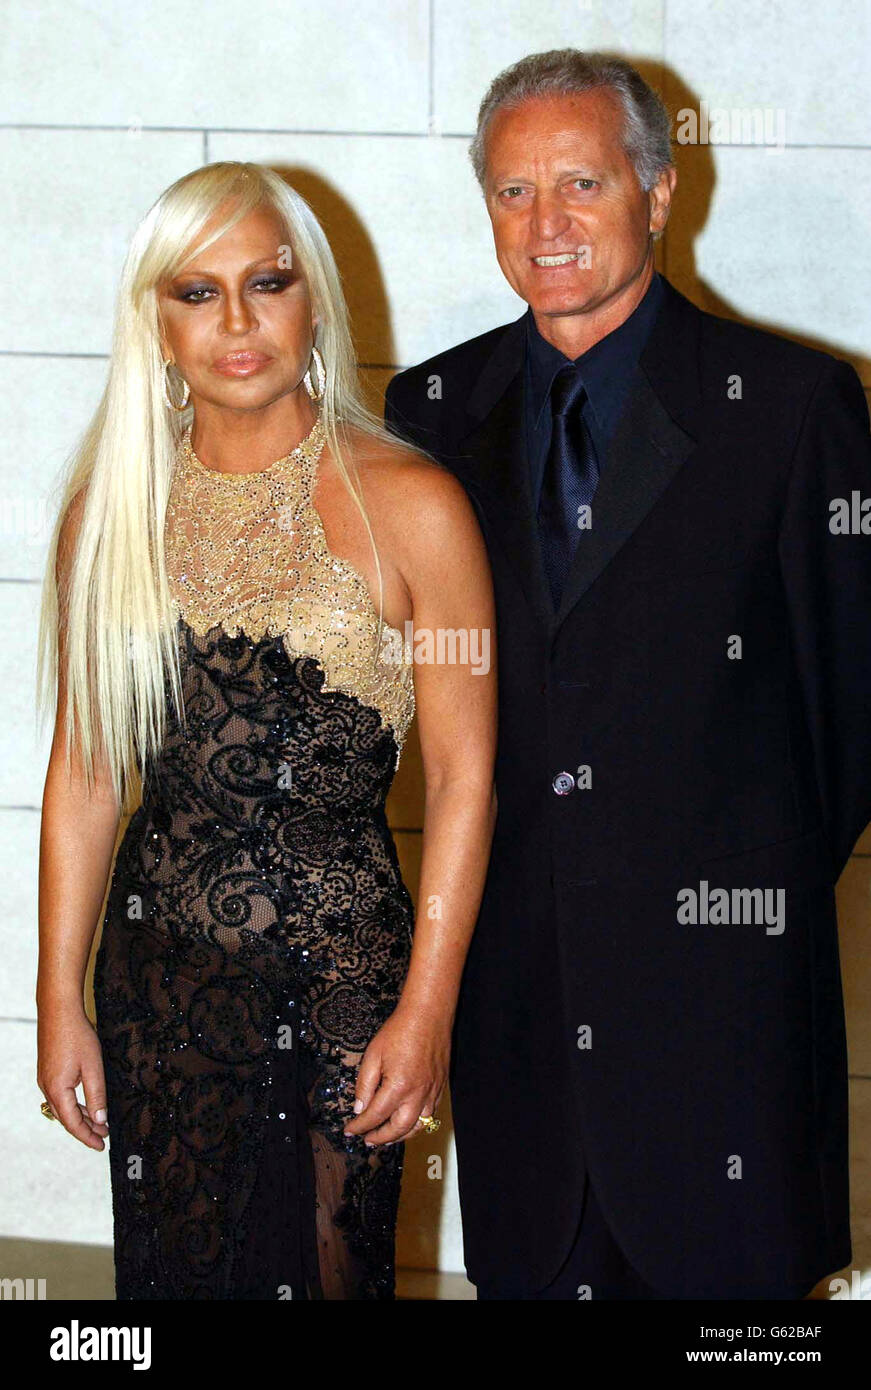 https://c8.alamy.com/comp/G62BAF/donatella-and-santo-versace-arriving-for-a-private-view-of-the-versace-G62BAF.jpg